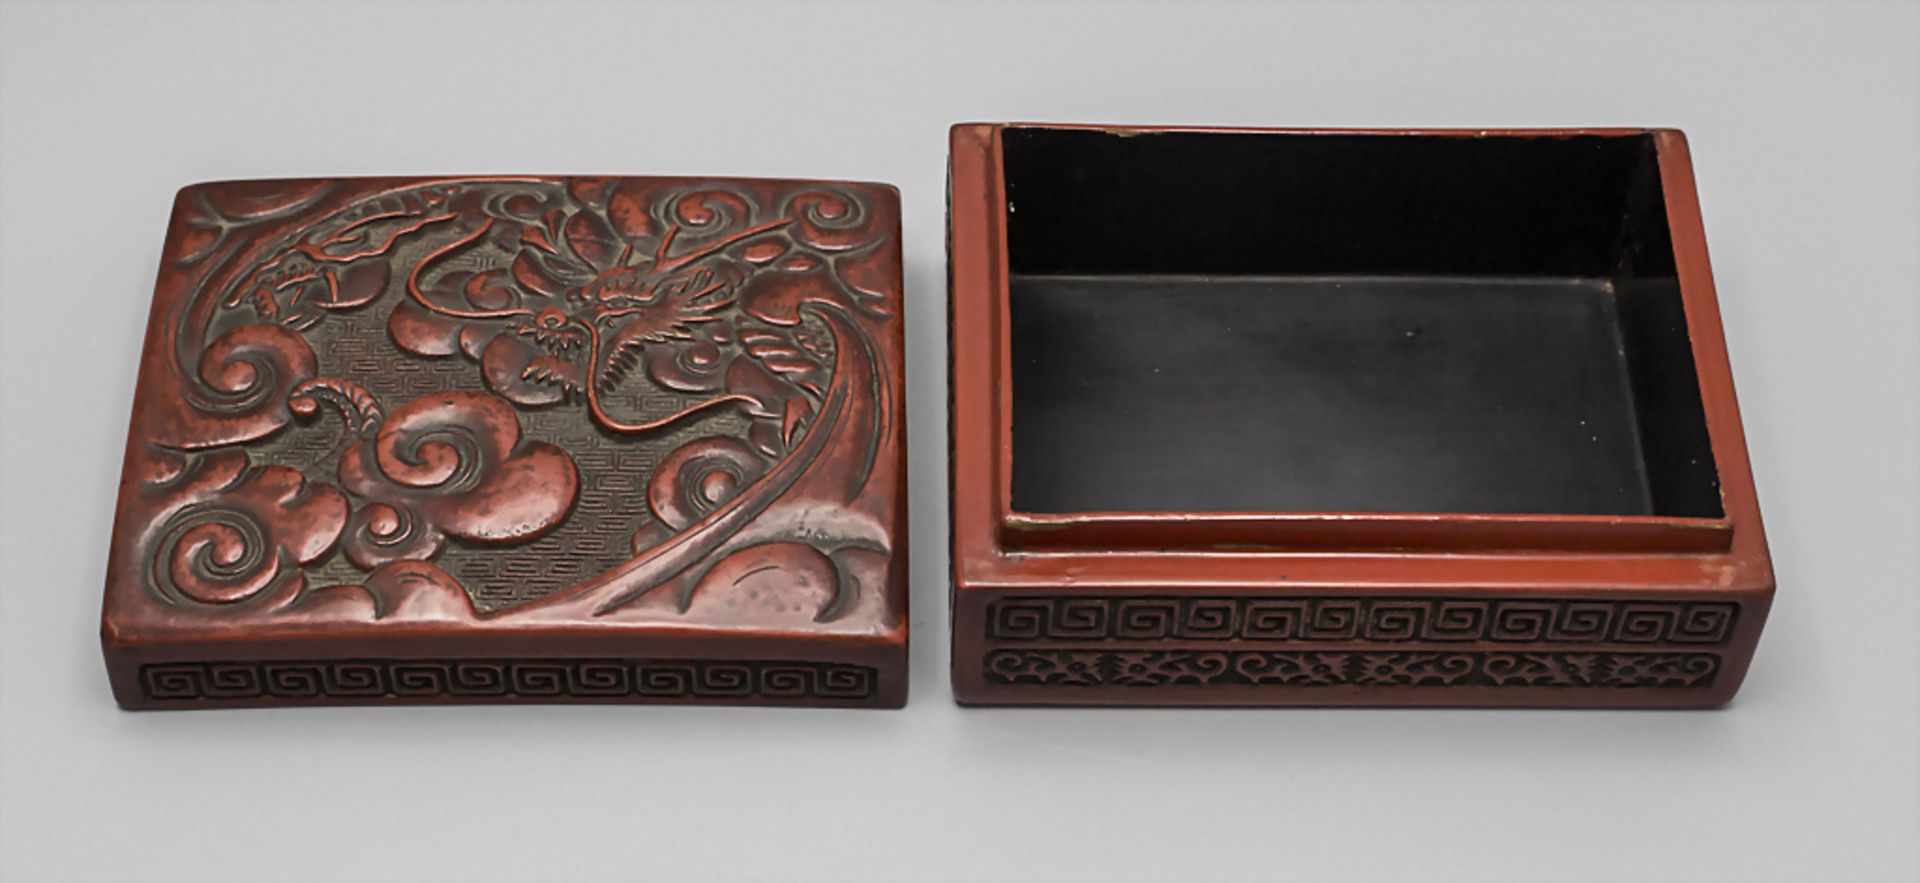 Lackdose mit Tablett / A lacquer box with tray, China, 19. Jh. - Image 6 of 7